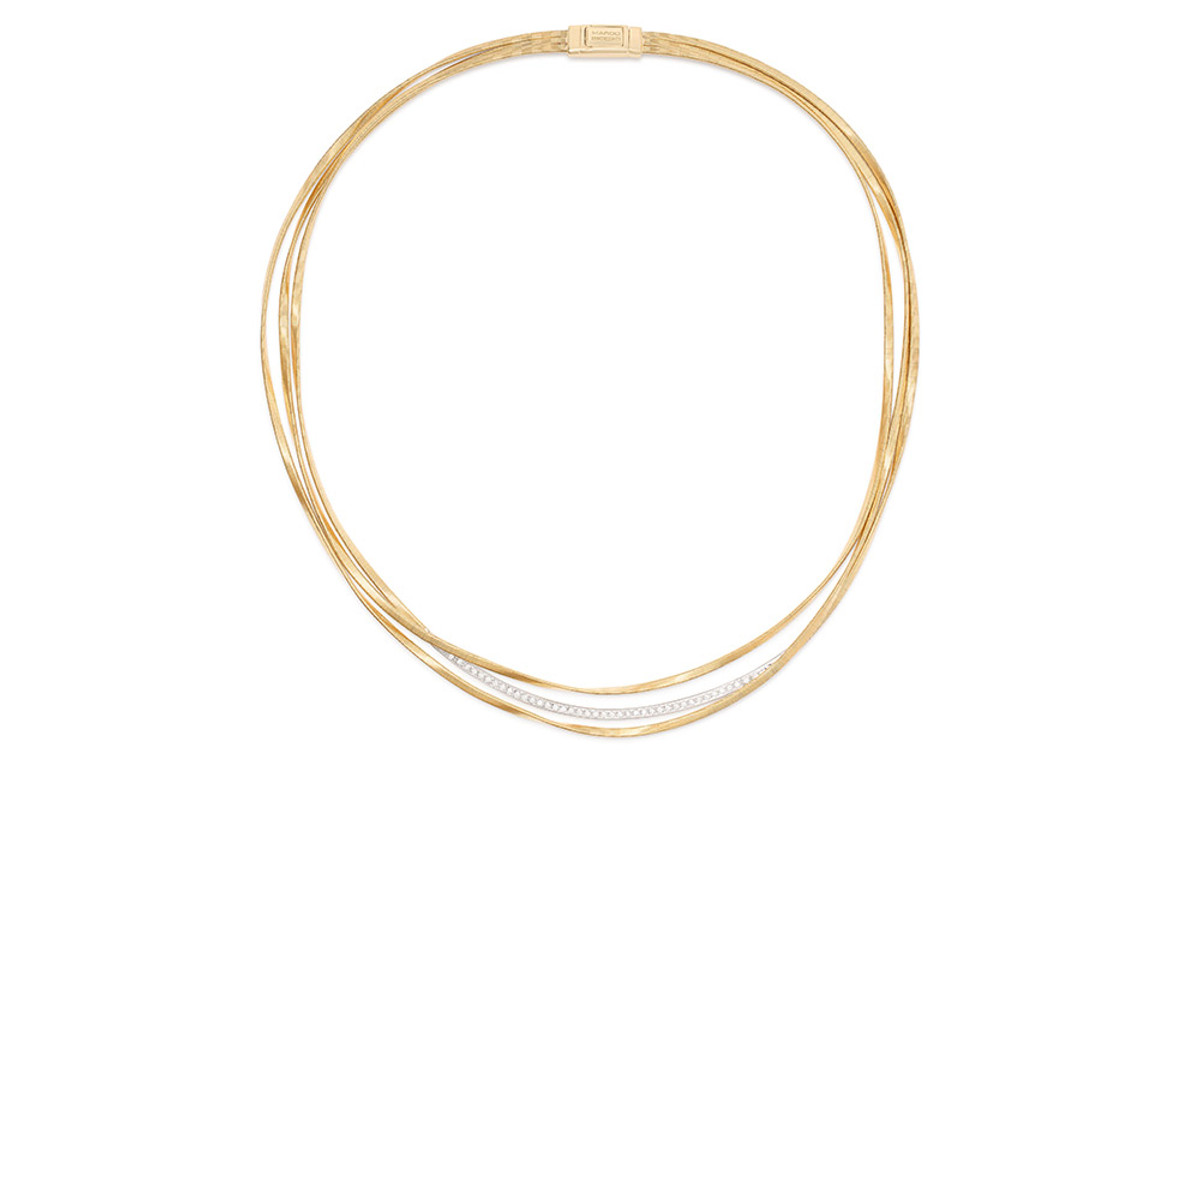 Marco Bicego Marrakech Collection 18K Yellow Gold  Large Diamond Necklace-54417 Product Image